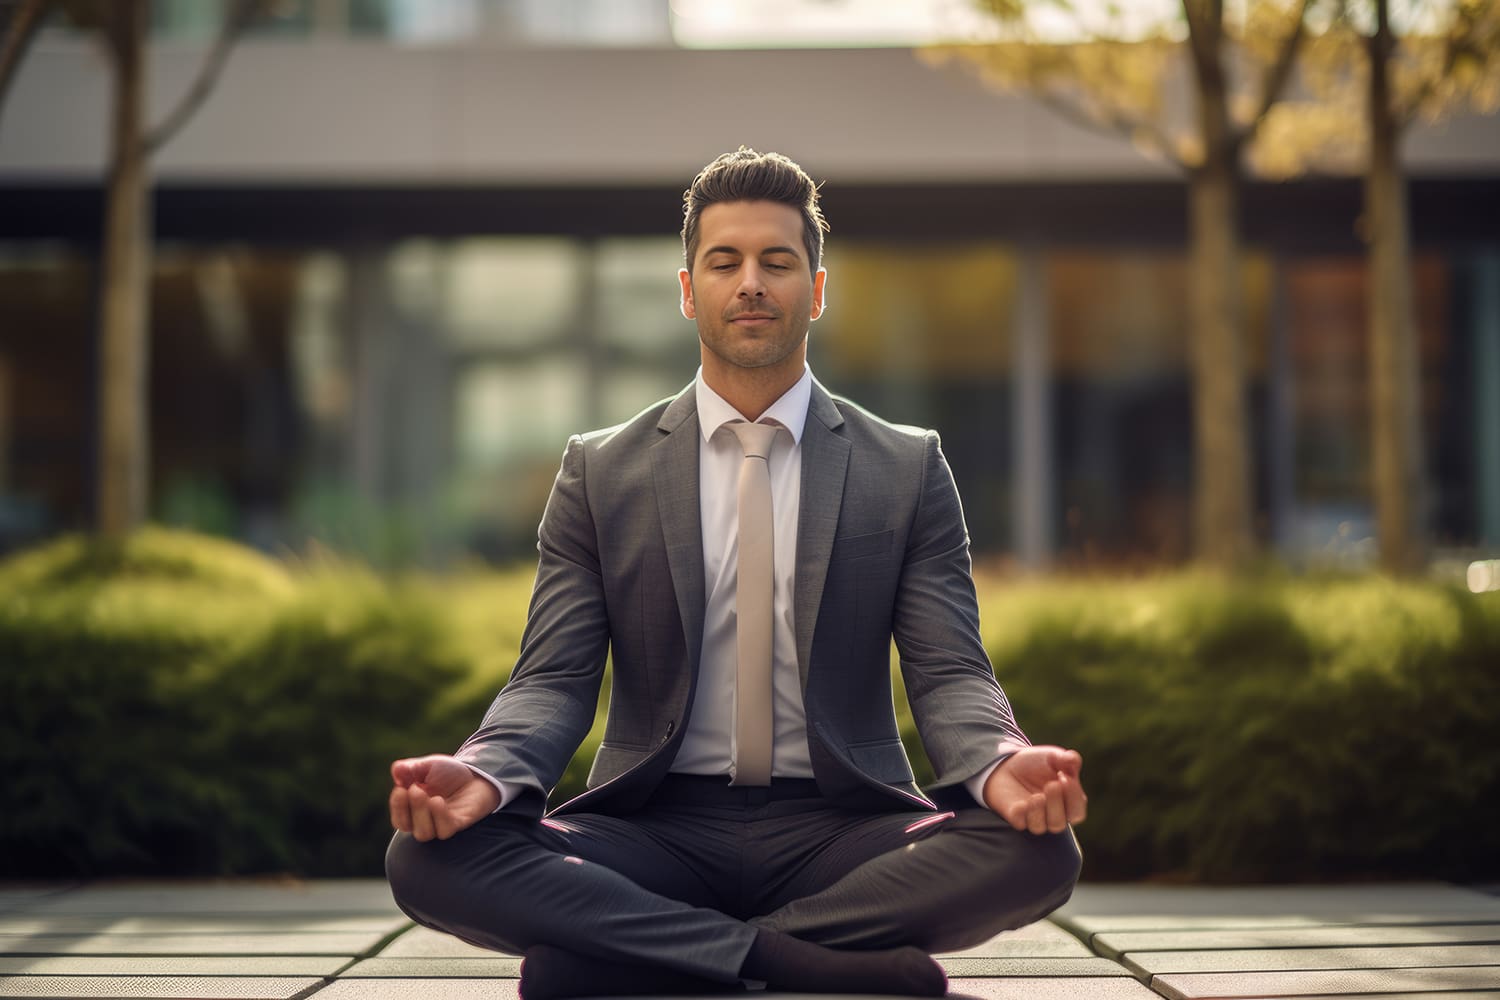 A man in a business suit sits cross-legged in a serene, outdoor setting with lush greenery and trees. He has his eyes closed and is meditating, with a calm and peaceful expression on his face. Sunlight filters through the leaves, adding a warm glow as he delves into hypnotherapy to achieve his goals faster.